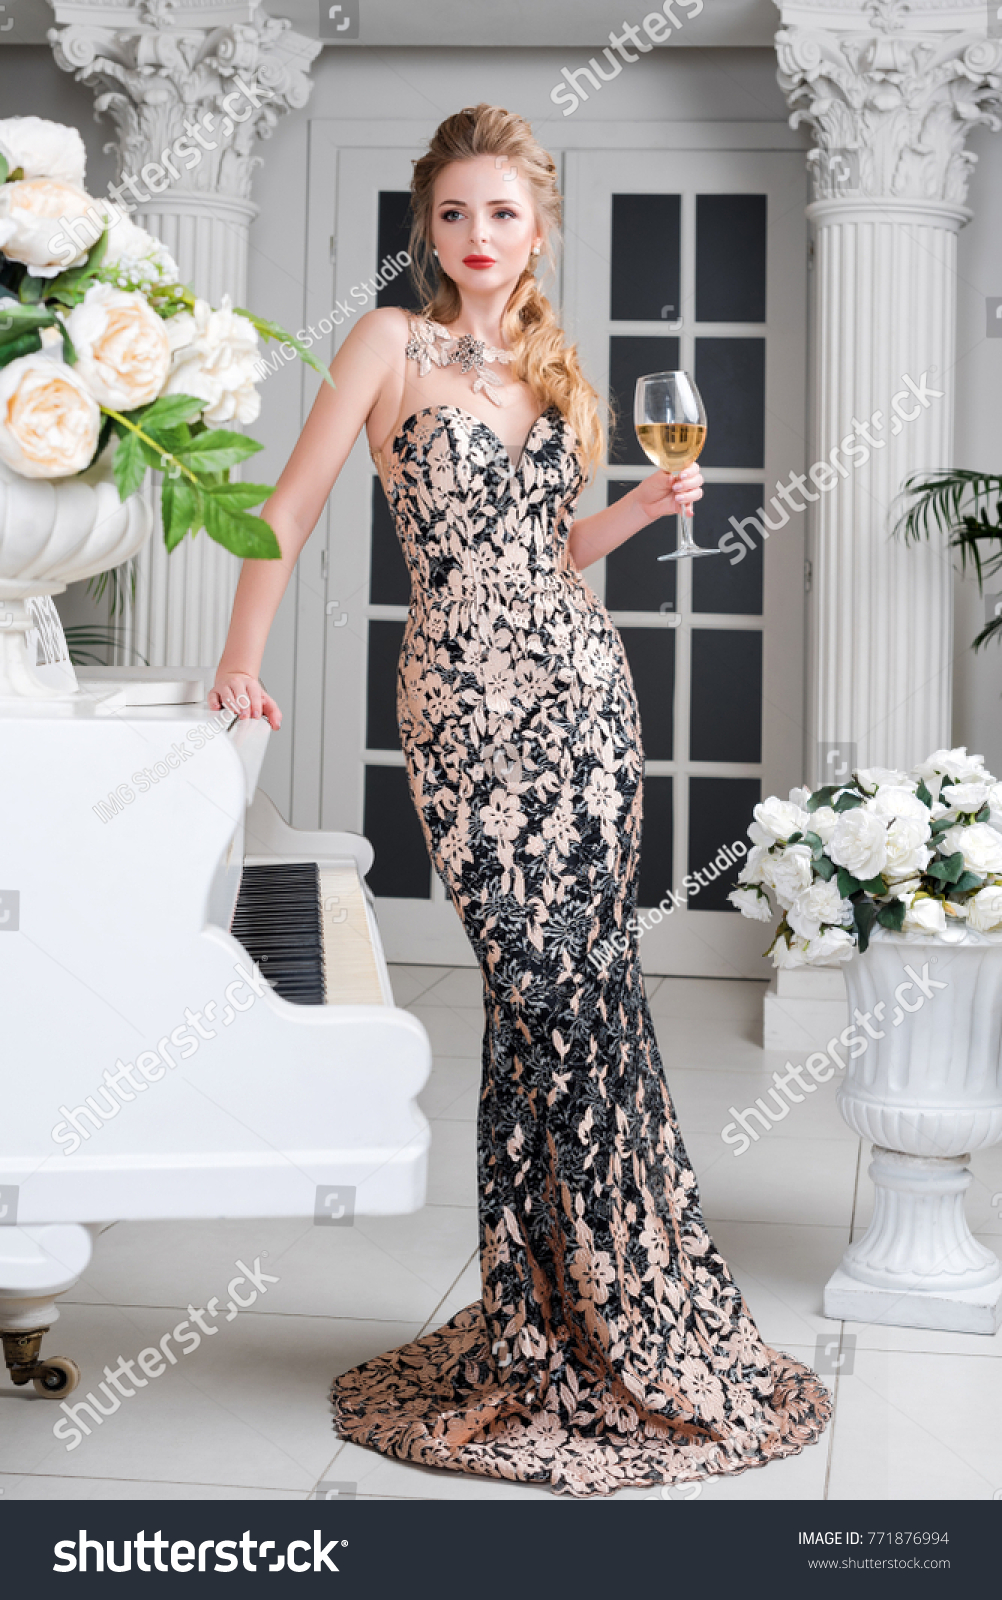 Elegant blonde lady with glass of wine in restaurant standing near white grand piano in a luxury classic interior. Beautiful sexy young woman with perfect body and pretty face make-up wearing evening #771876994